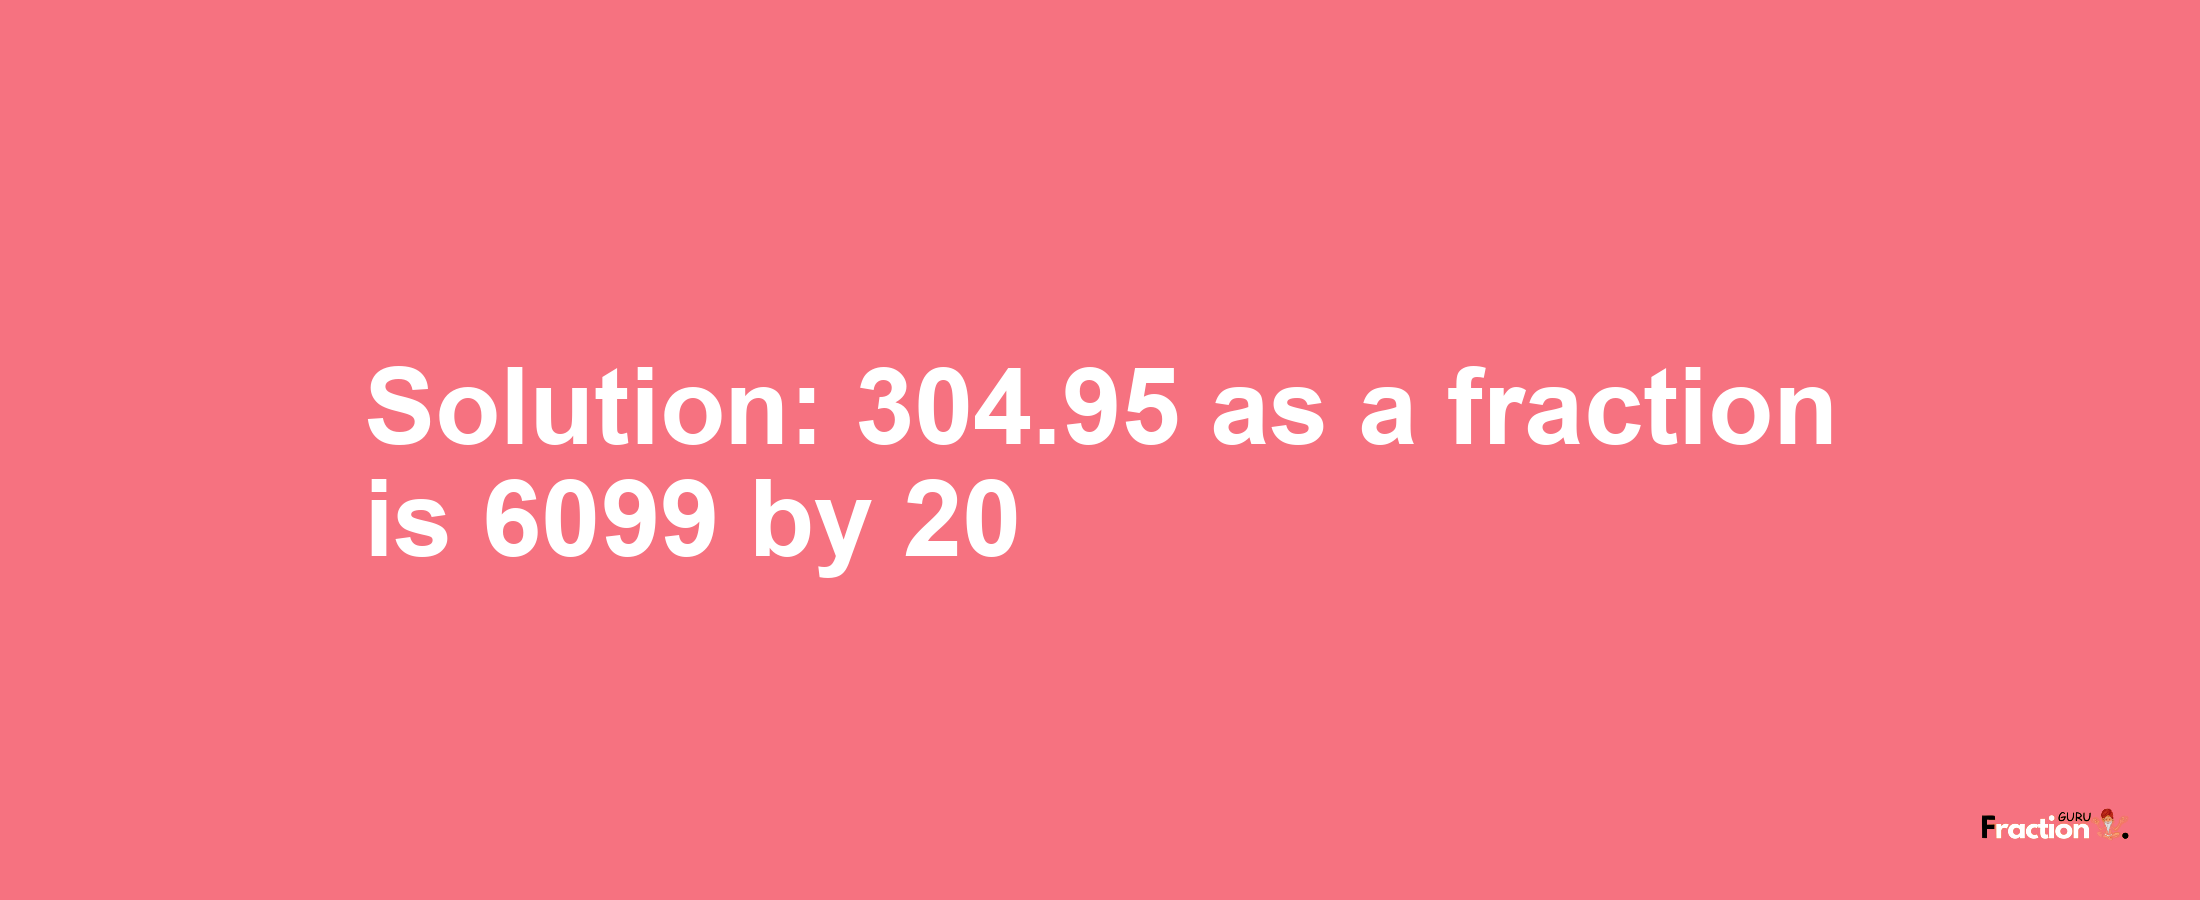 Solution:304.95 as a fraction is 6099/20